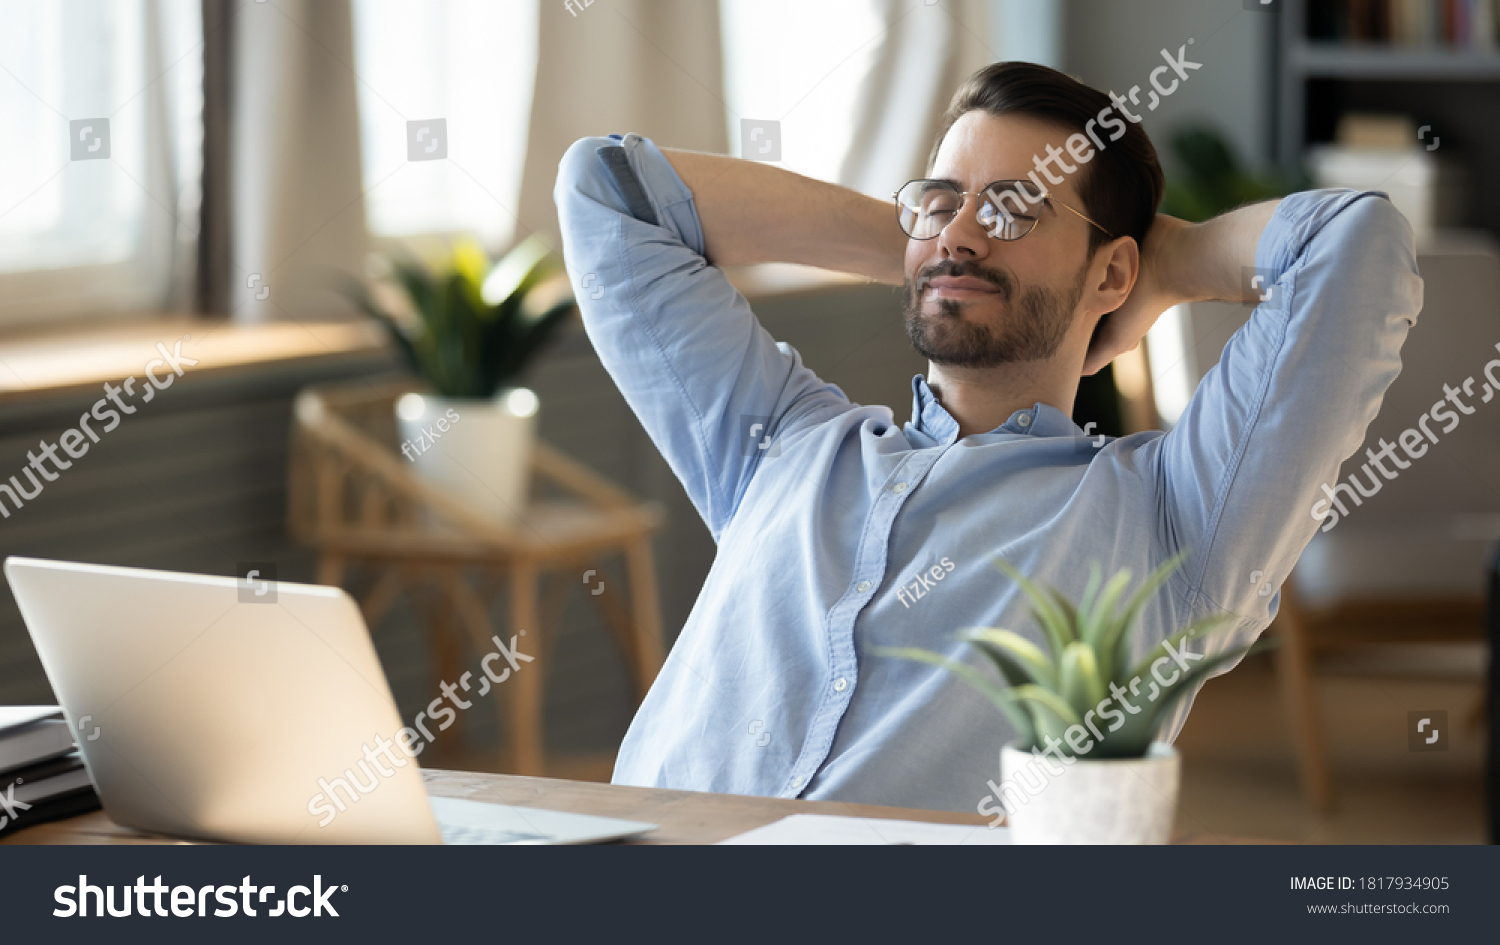 Calm millennial man in glasses sit relax at home office workplace take nap or daydream. Happy relaxed Caucasian young male rest in chair distracted from computer work, relieve negative emotions. #1817934905